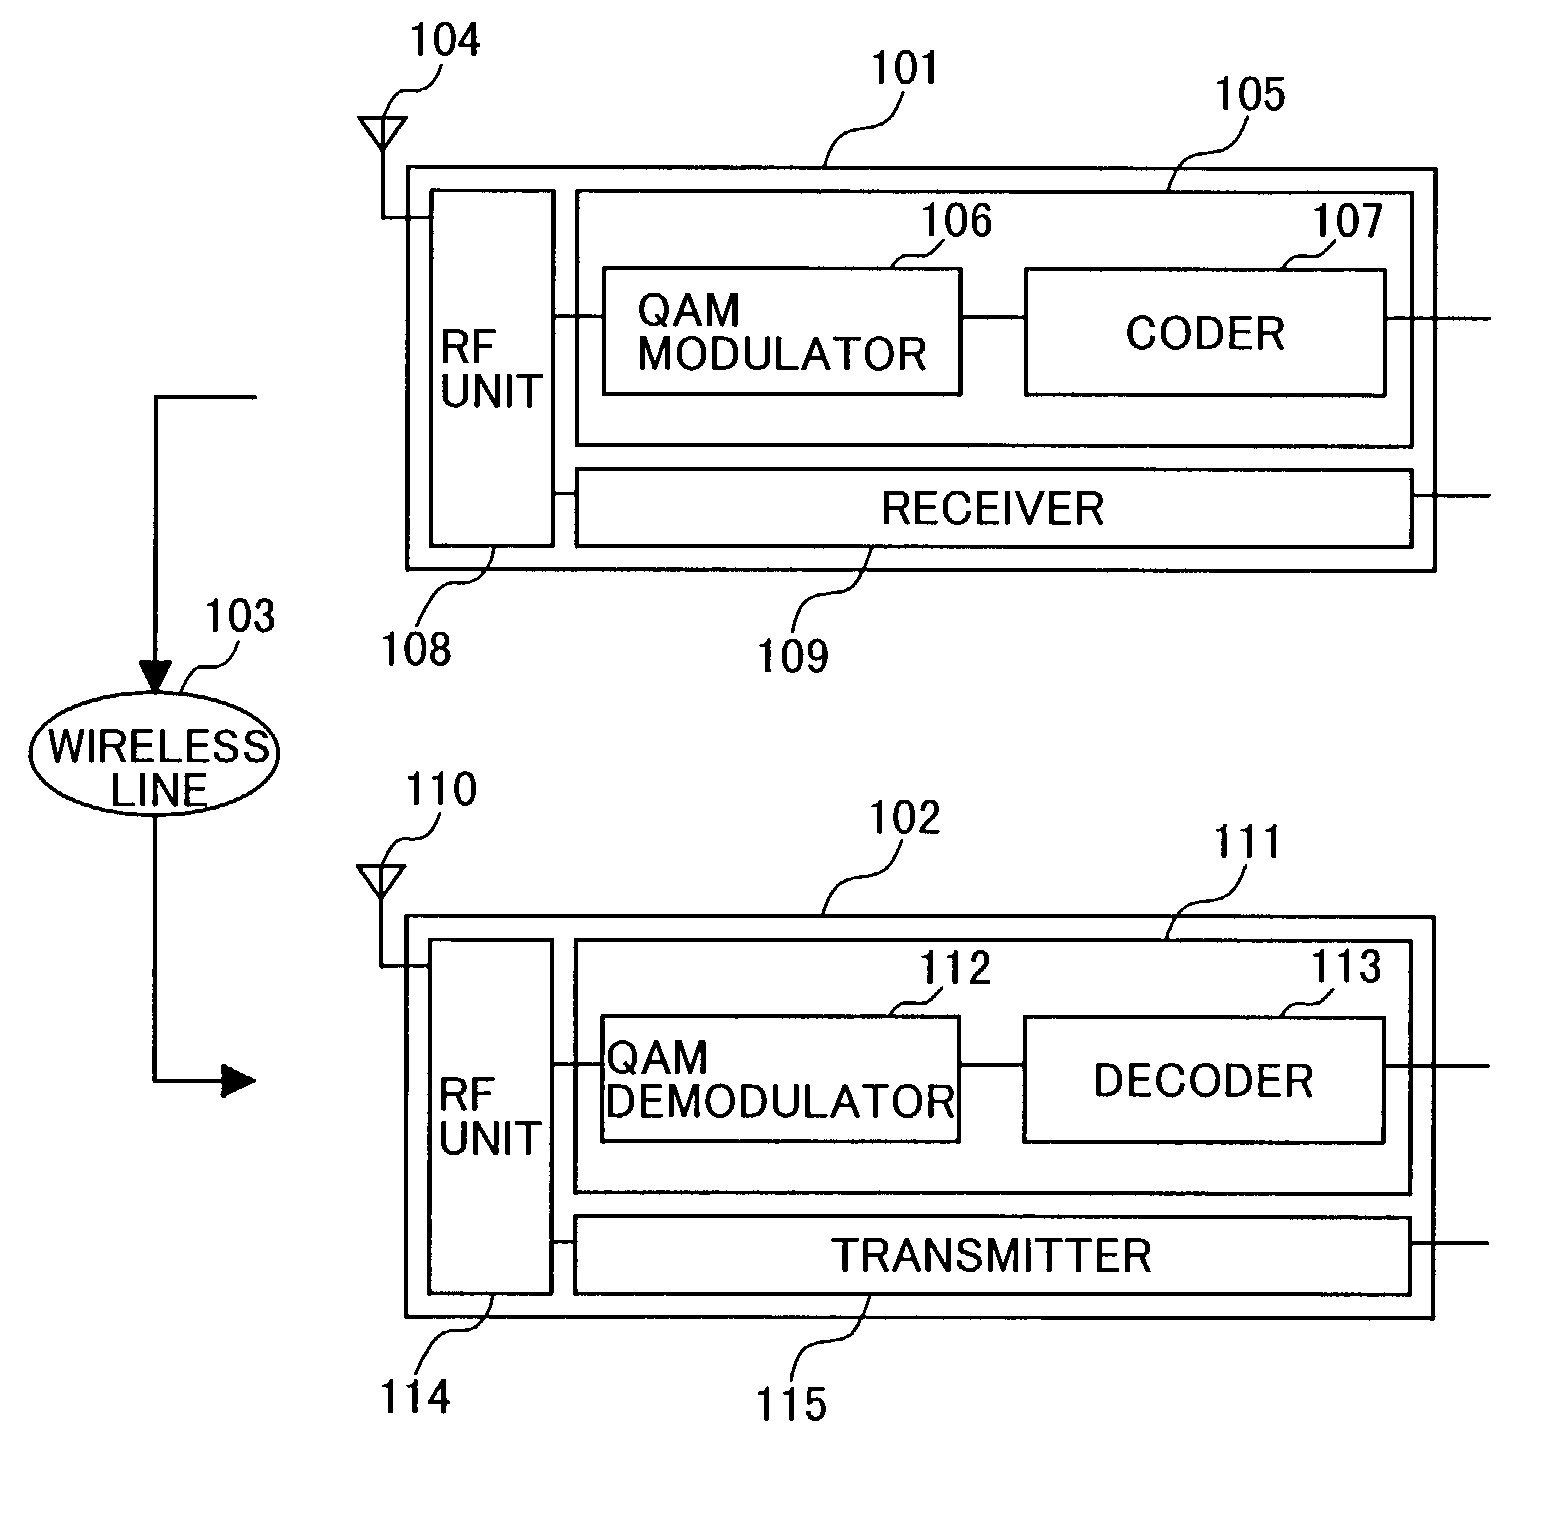 Mapping method of code word with QAM modulation